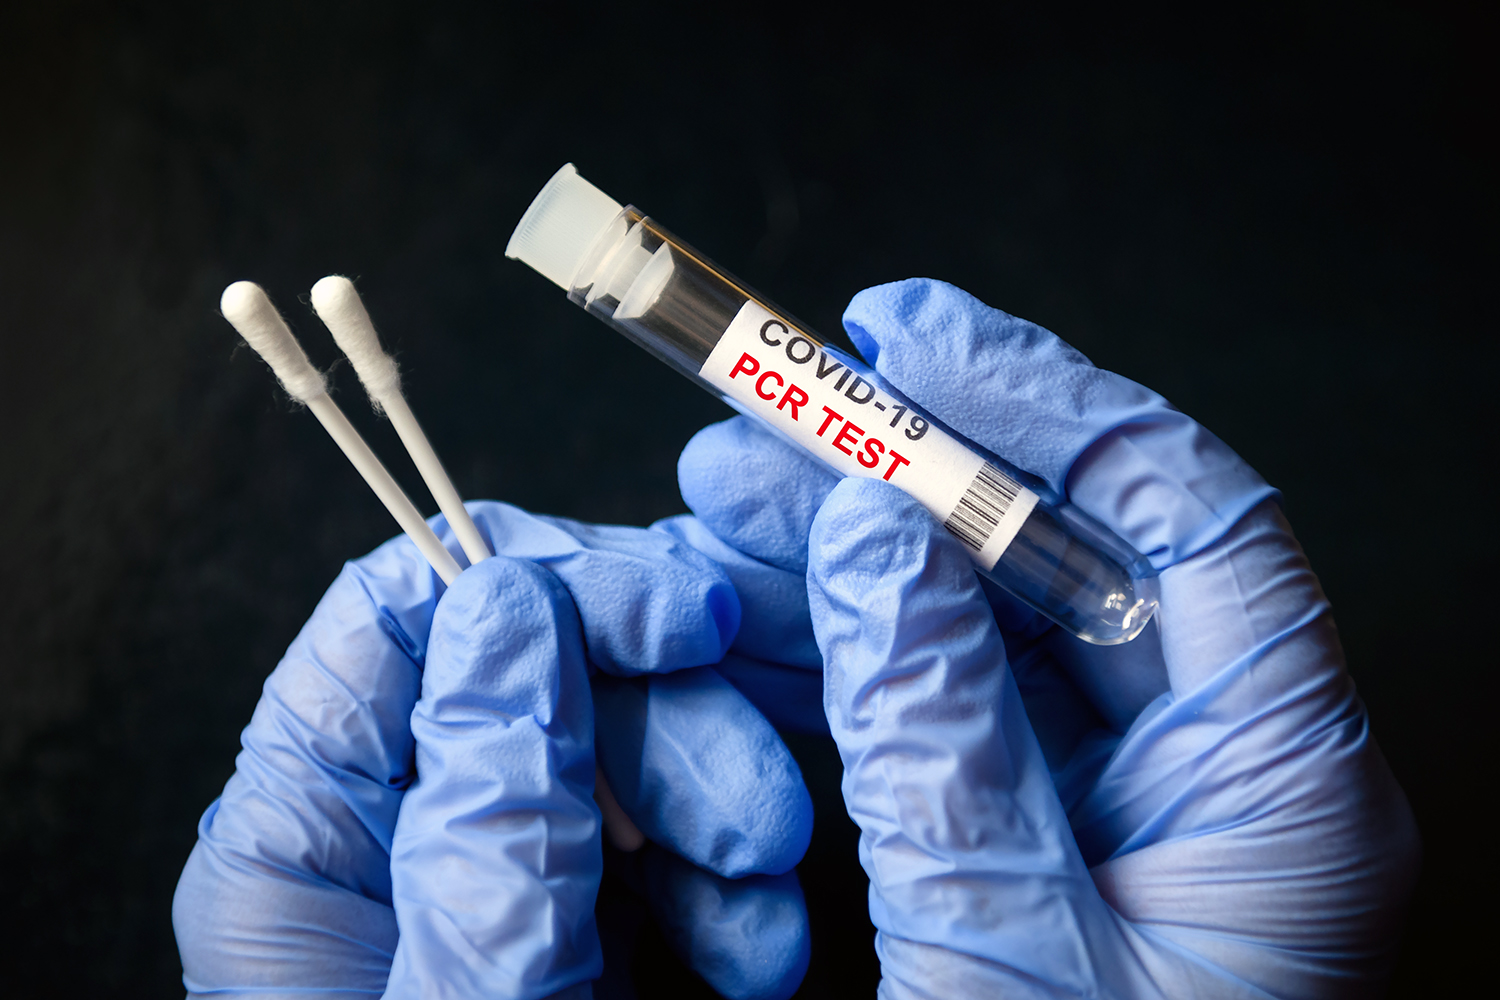 COVID-19 swab collection kit in doctor hands, nurse holds tube of coronavirus PCR test on black background. Concept of corona virus diagnostics, medical testing and cure during coronavirus pandemic.